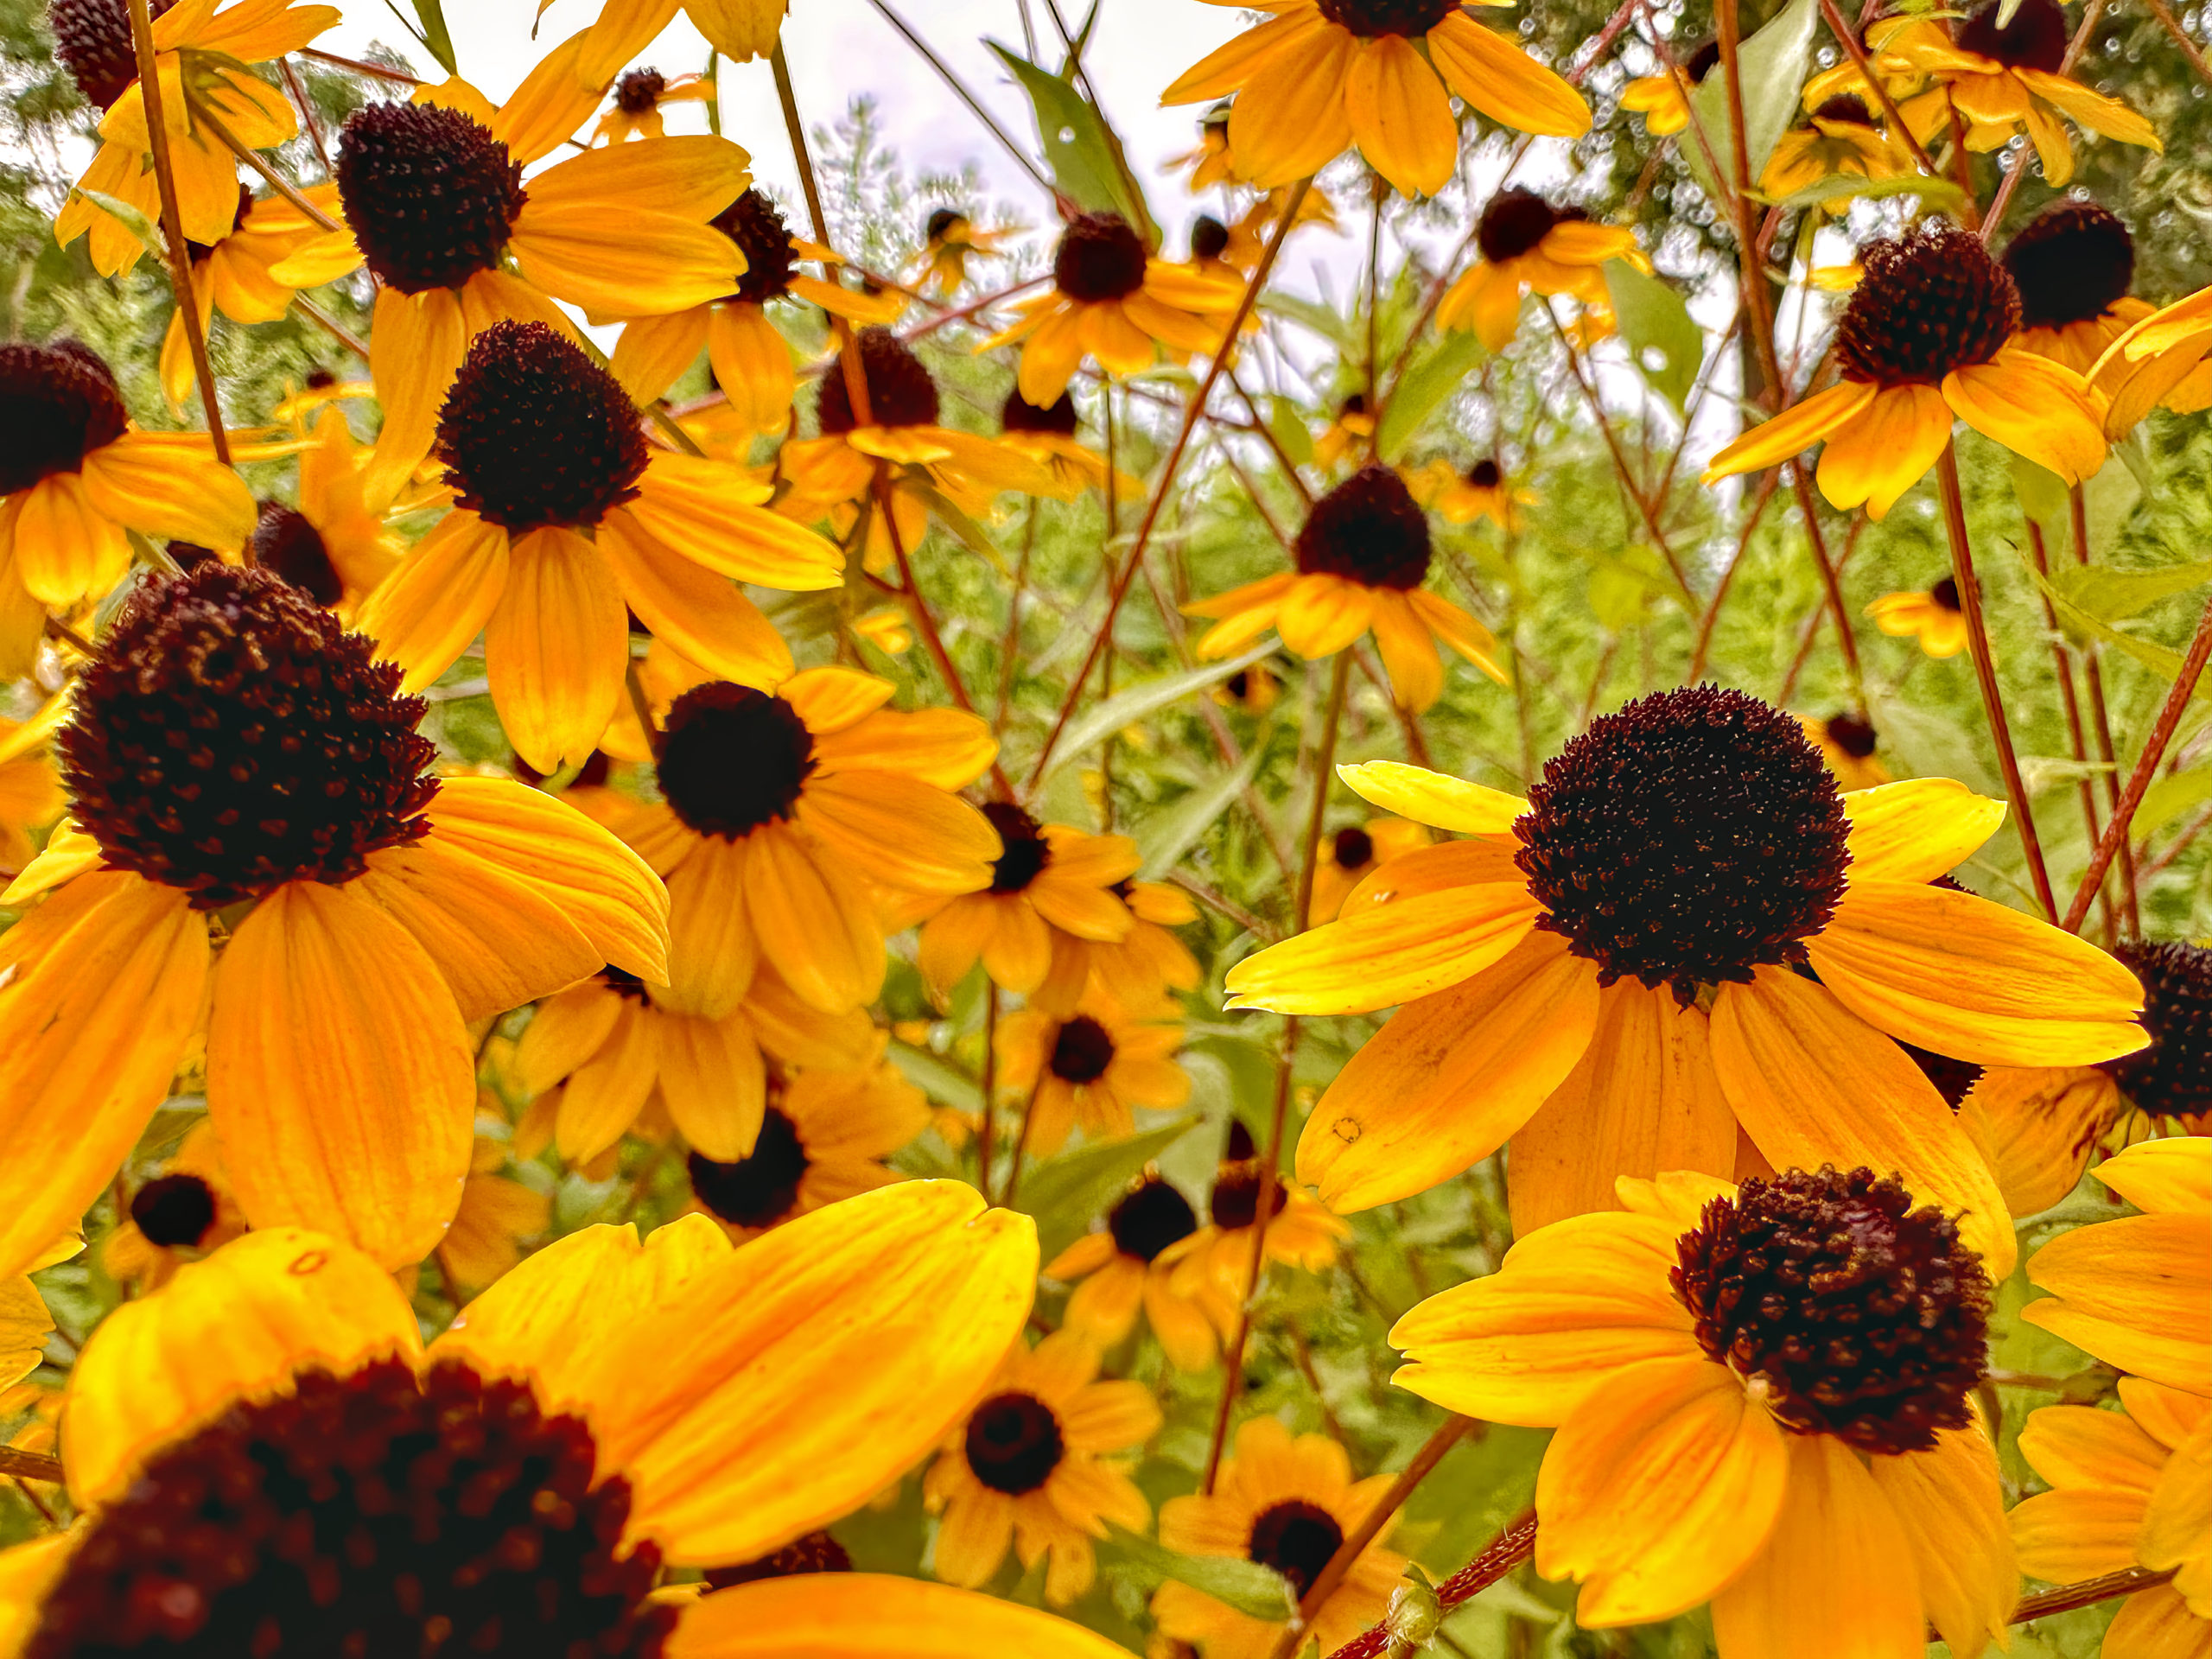 A vibrant golden yellow patch of coneflowers